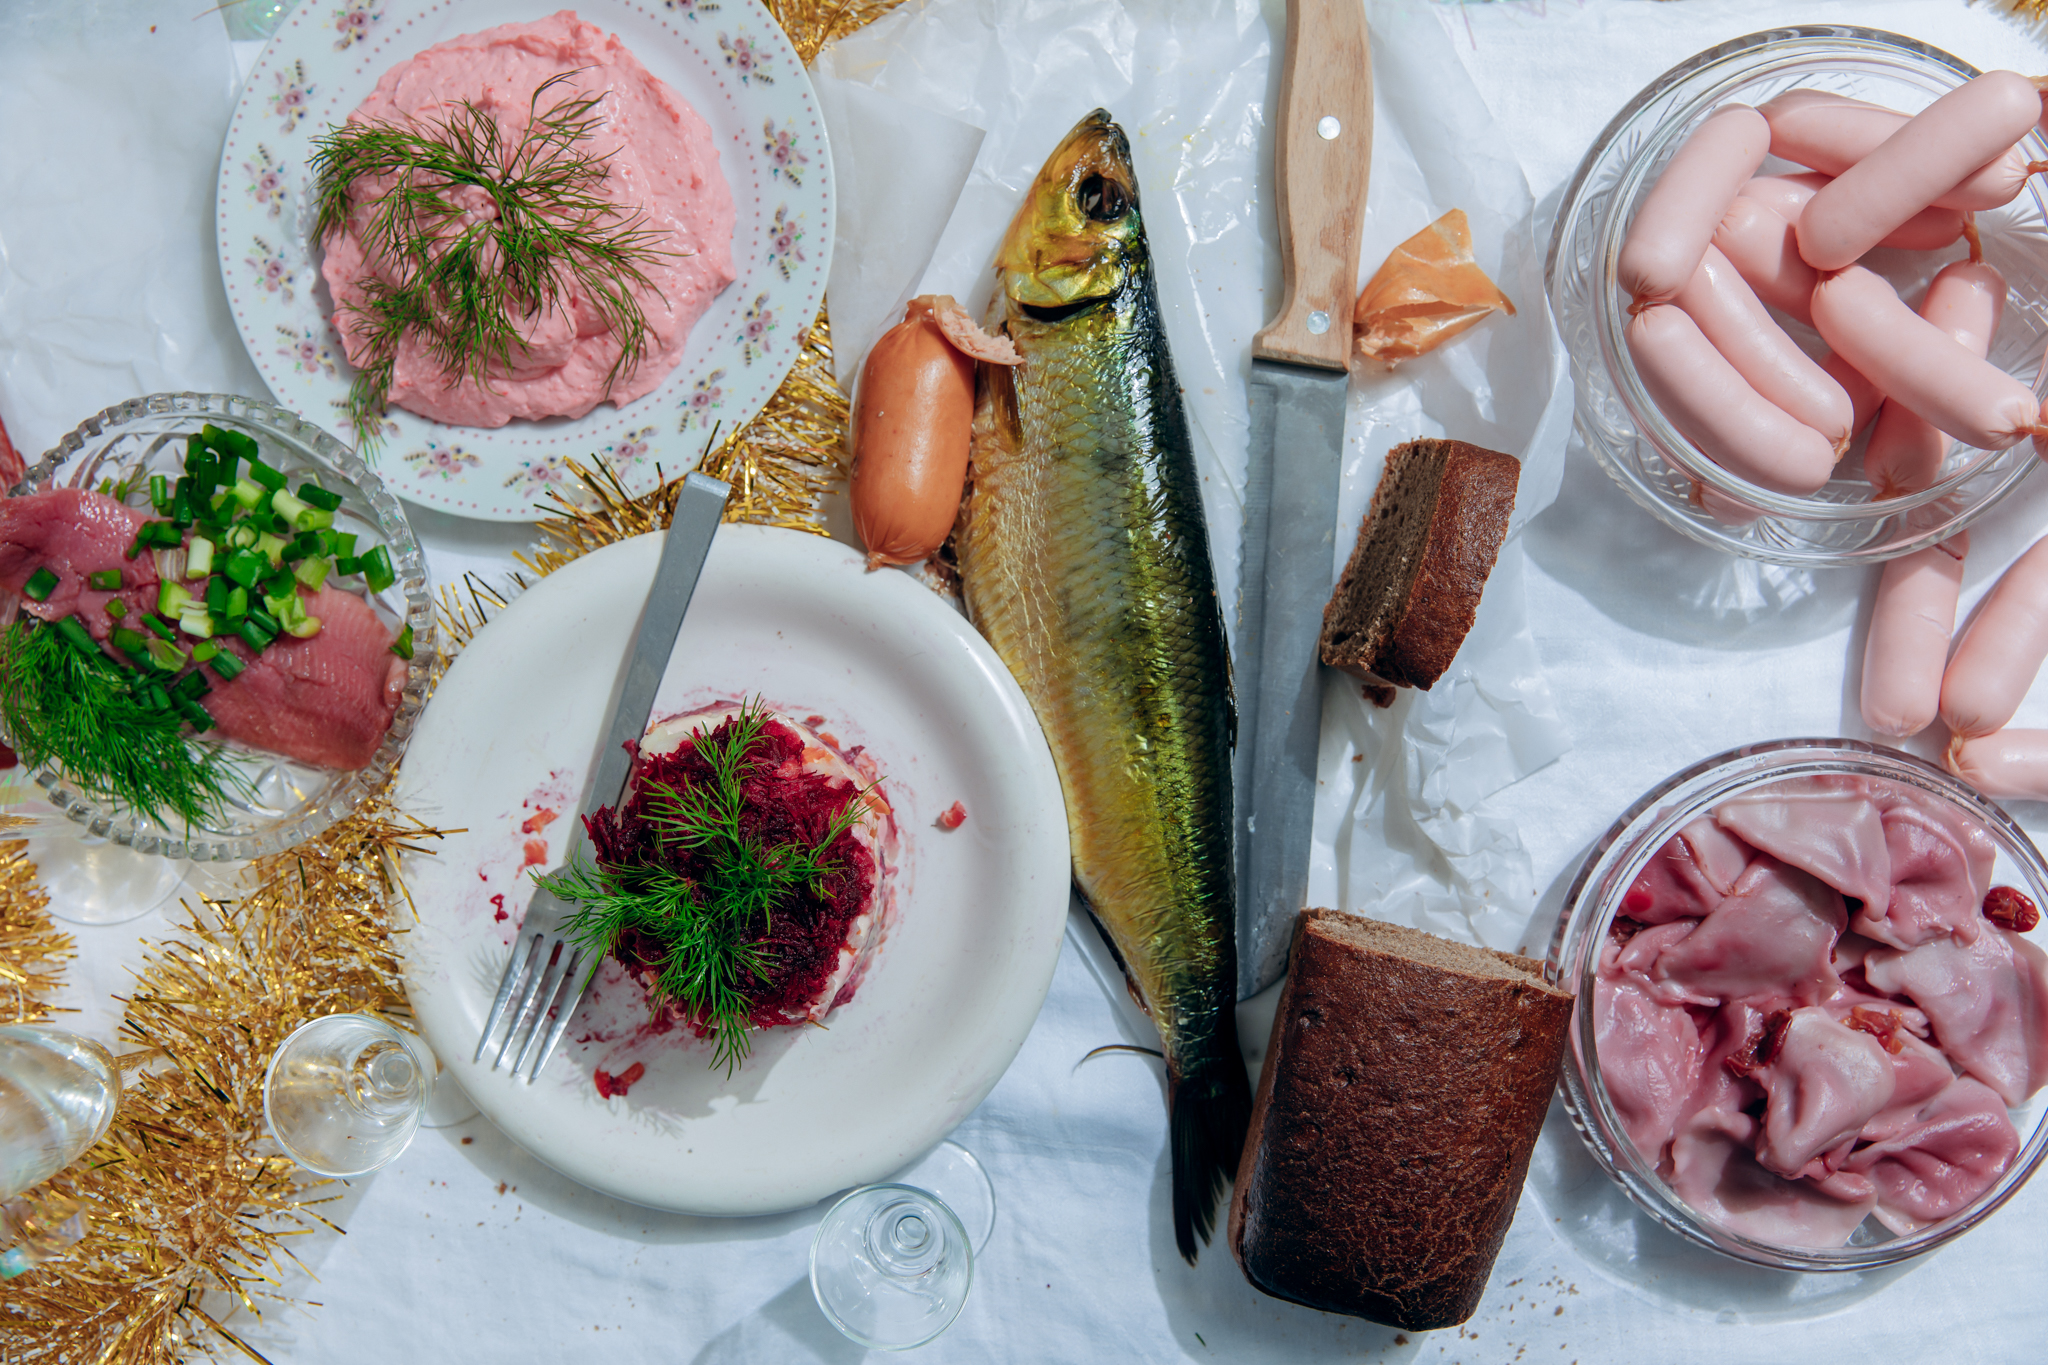 Plates of Russian dishes like cured meats and fish atop a white tablecloth